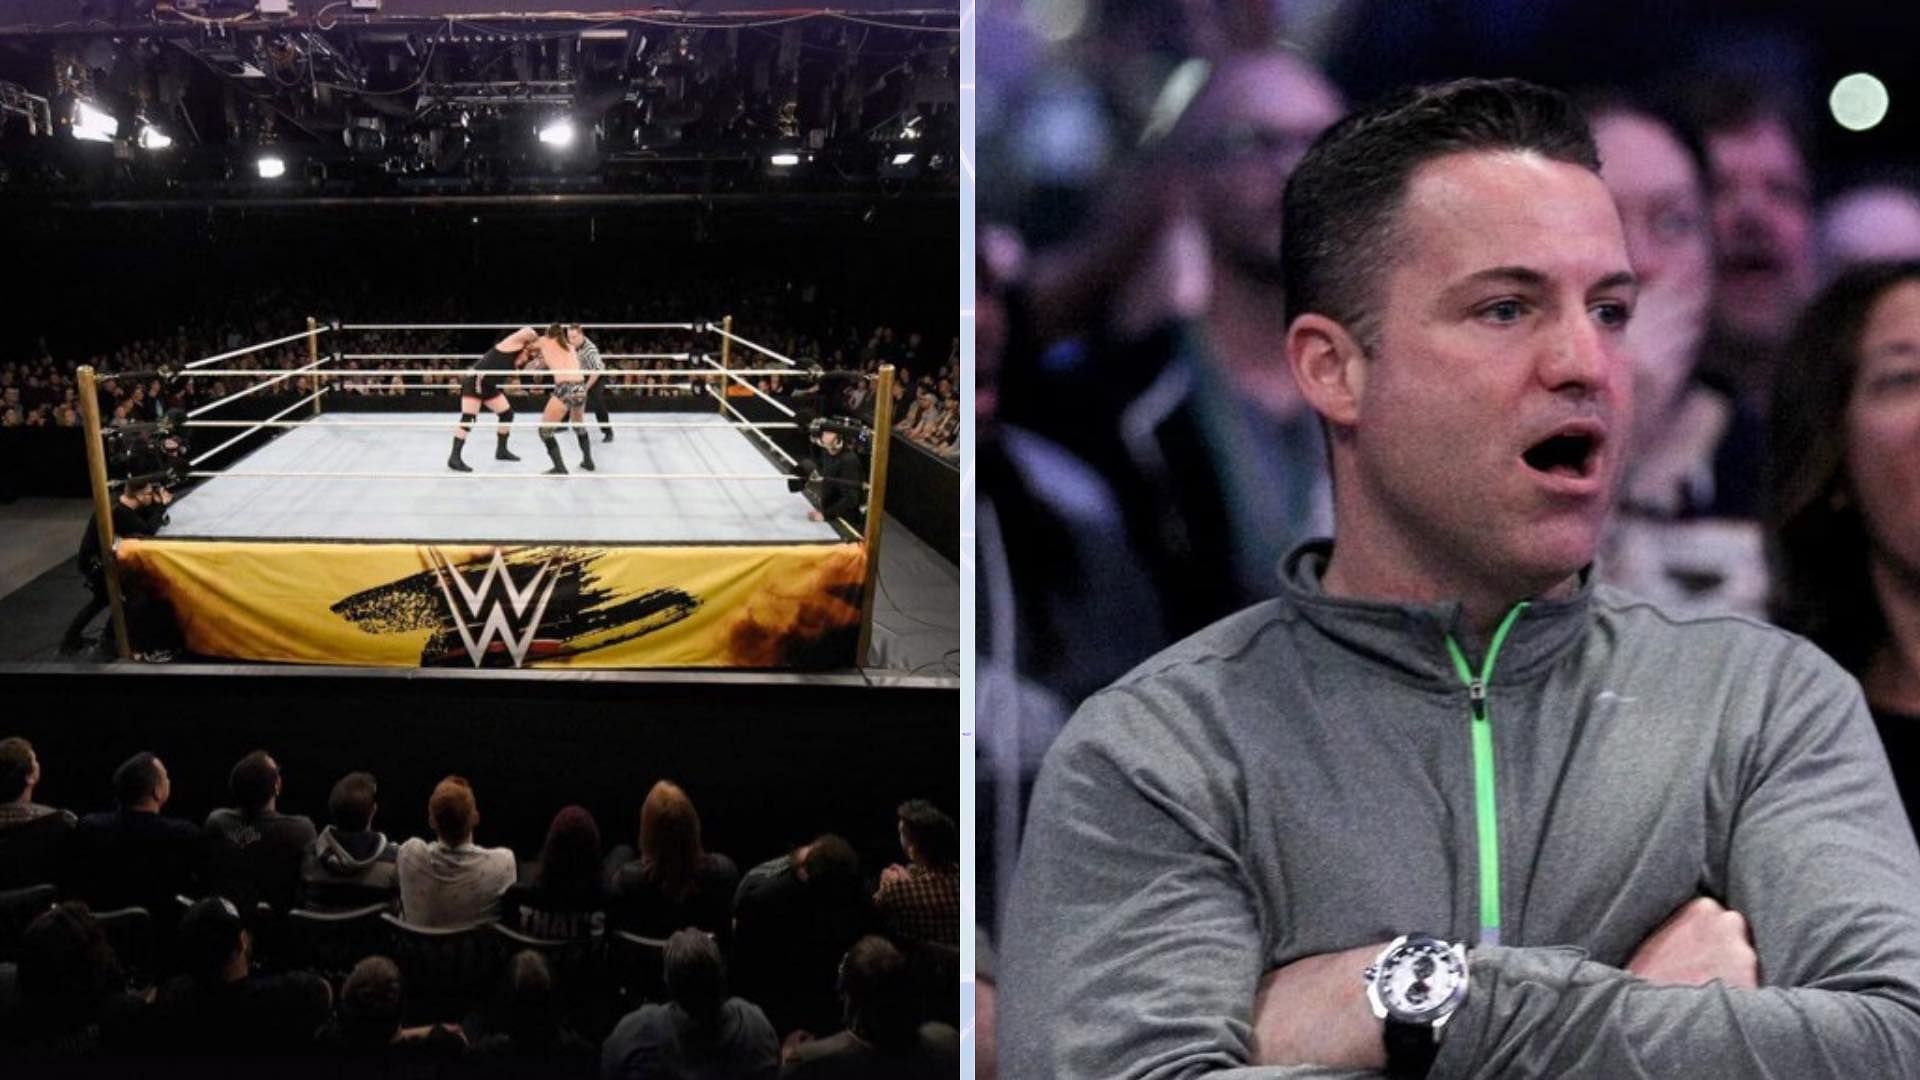 Former WWE champion sent a message at recent show